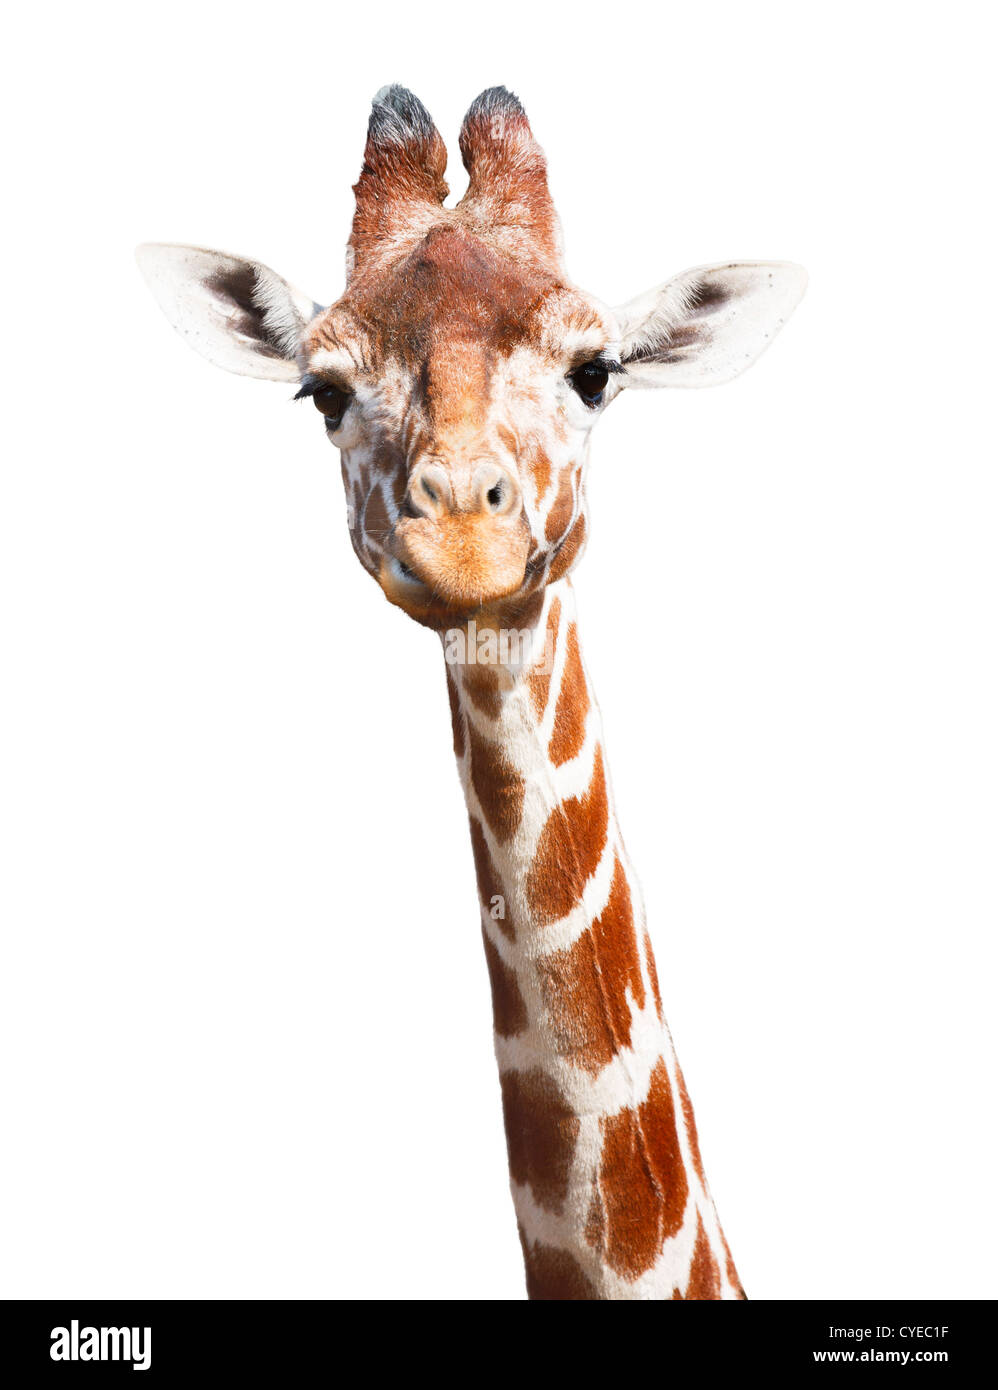 Giraffe head and neck isolated against a white background with clipping path Stock Photo